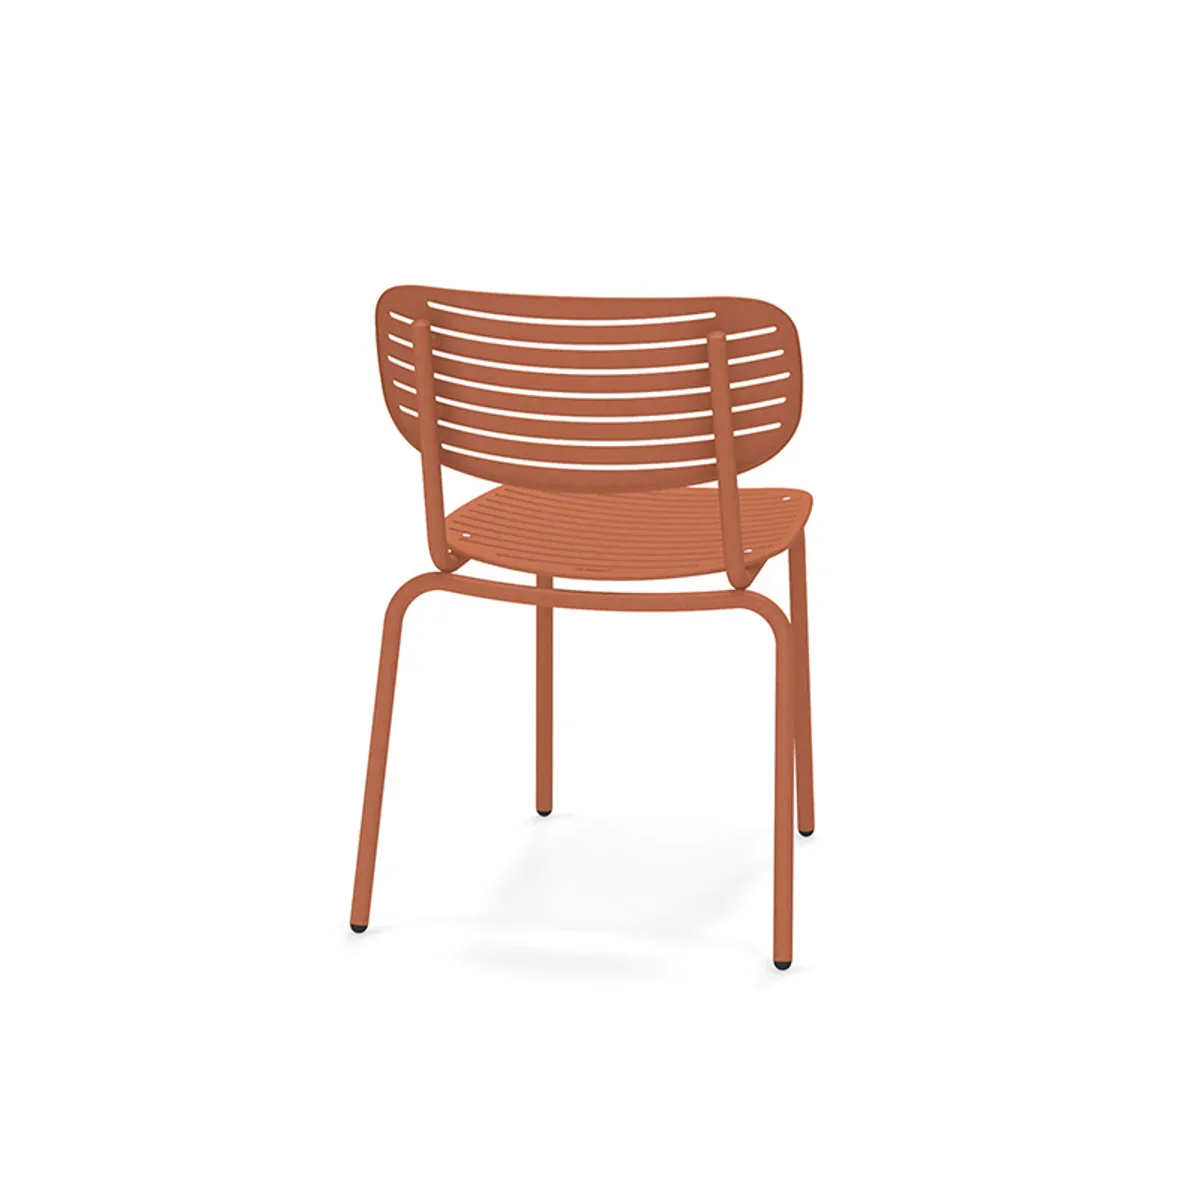 Mom Side Chair In Orange Metal Furniture For Outdoors 030